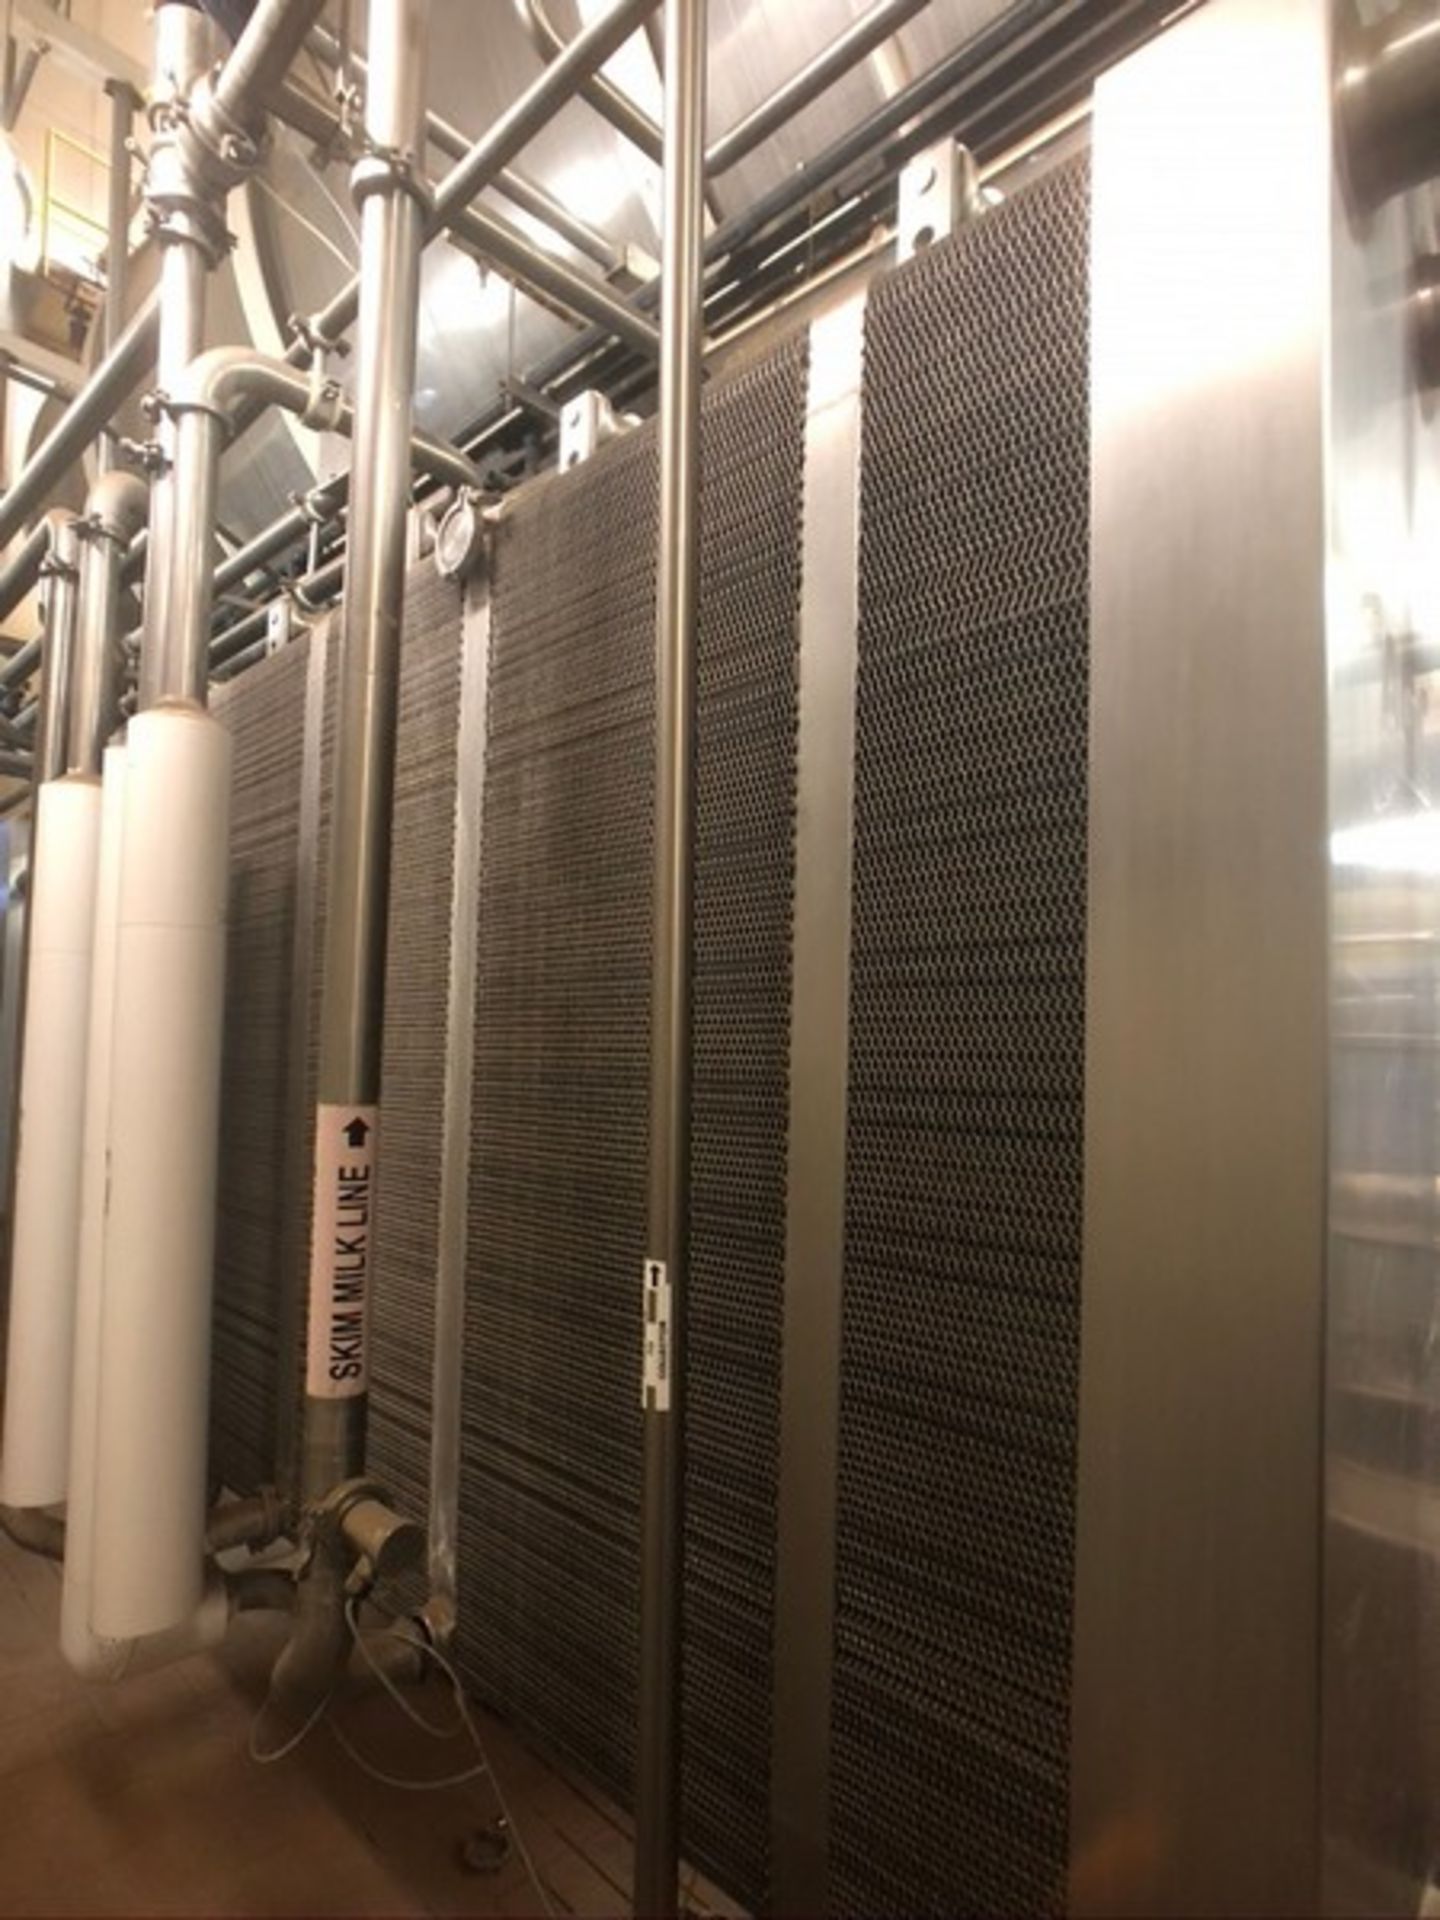 AGC HEAT EXCHANGER W 4 DIVIDERS, INCLUDES PUMP (RIGGING, SITE MANAGEMENT AND LOADING FEE $1,790. - Image 2 of 12